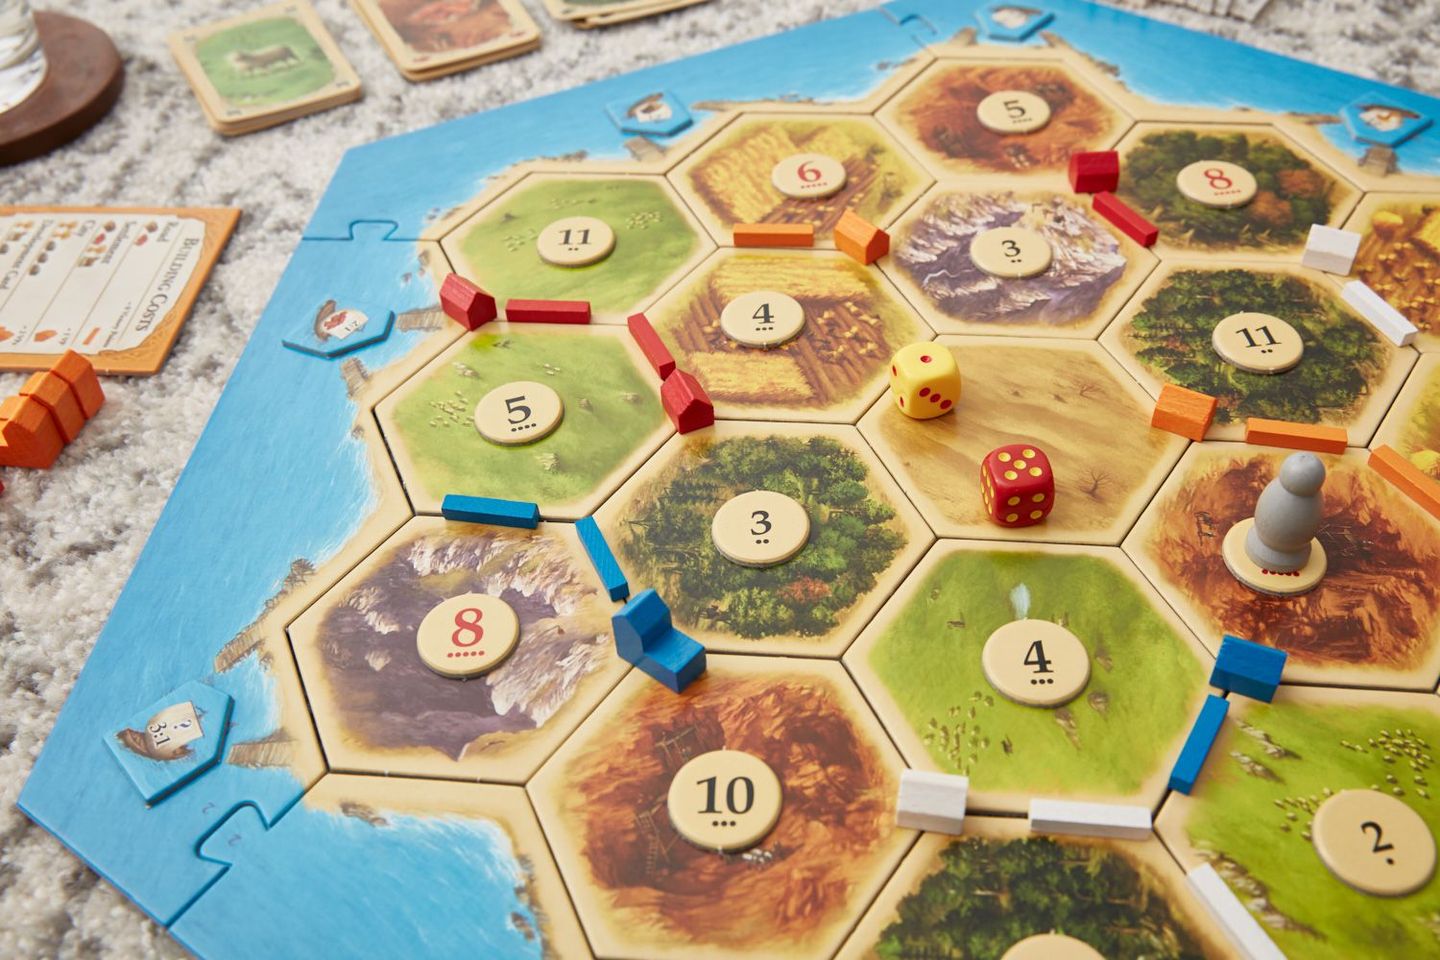 A detailed snapshot of a Settlers of Catan game in progress, showcasing varied resource tiles, numbered chits, dice and color-coordinated player settlements.